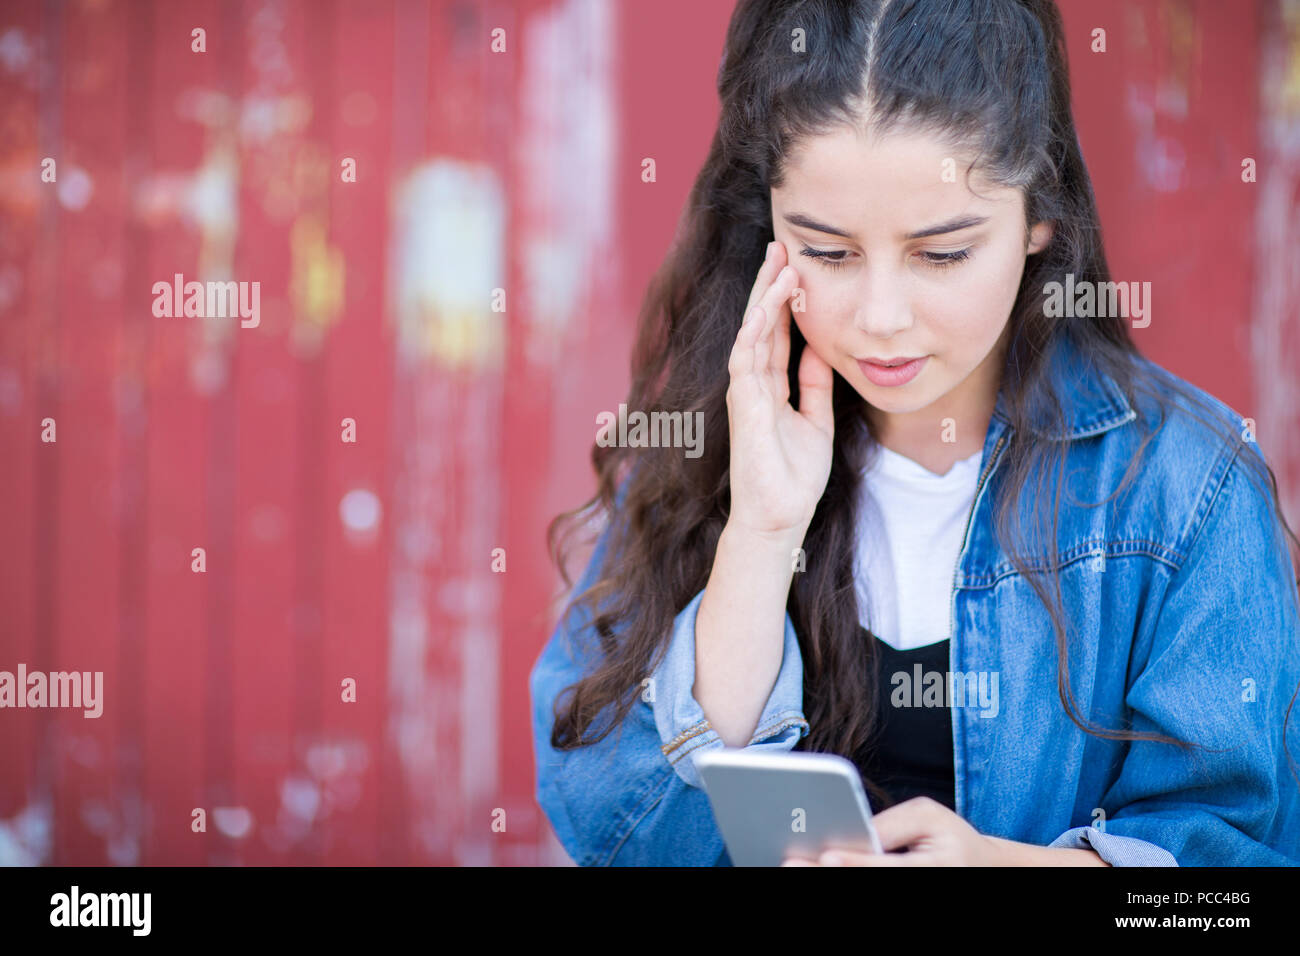 Teenage Girl Victim Of Bullying By Text Message Outdoors Stock Photo